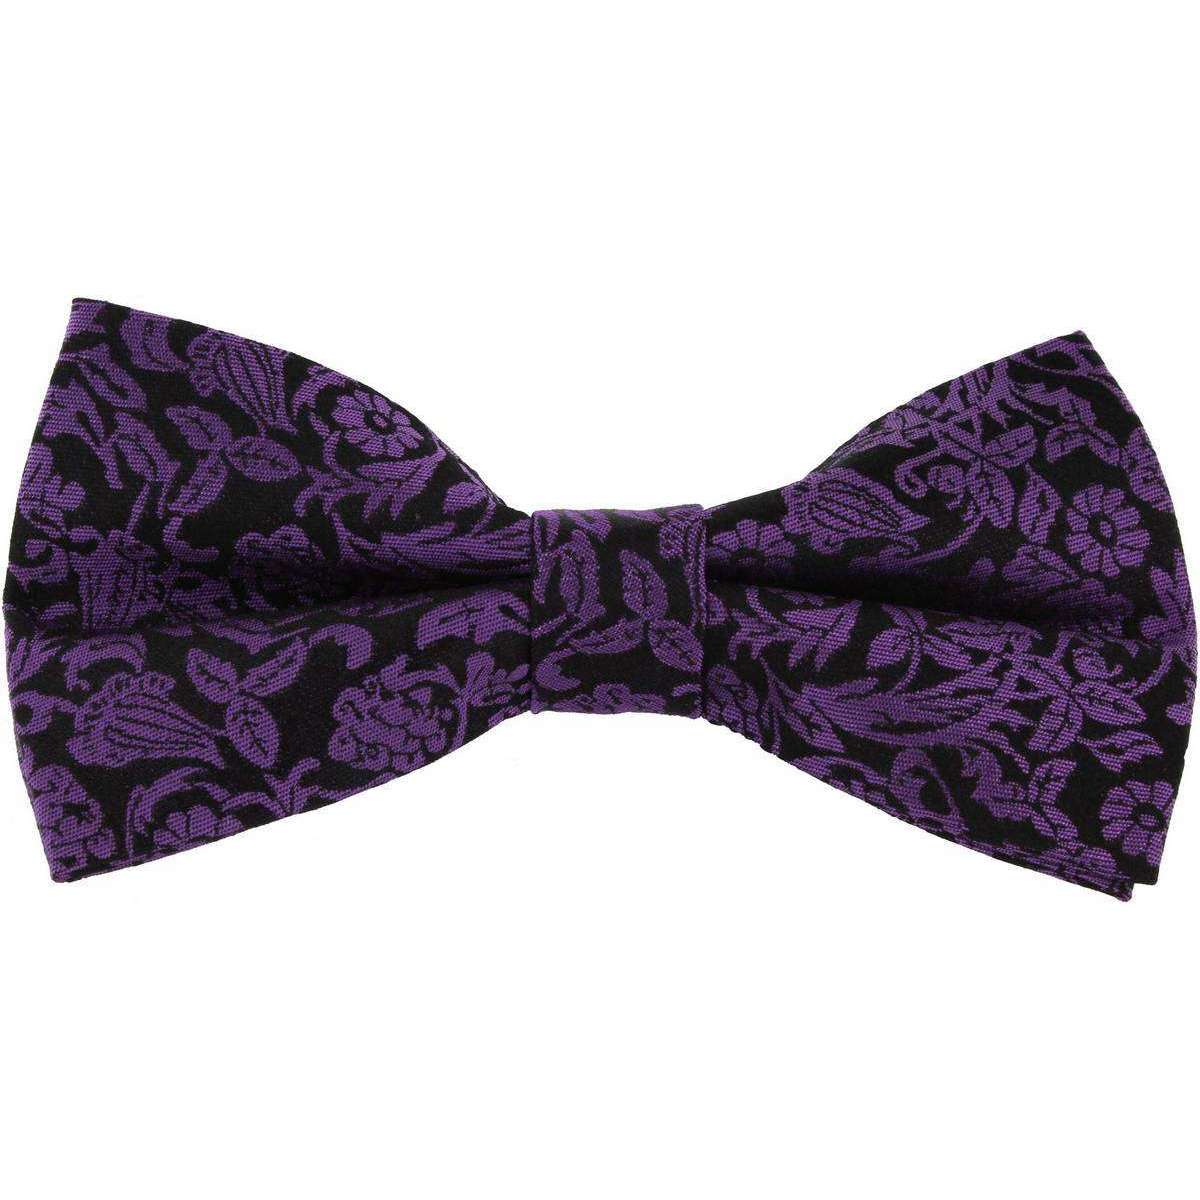 Michelsons of London Jacquard Floral Silk Bow Tie - Purple